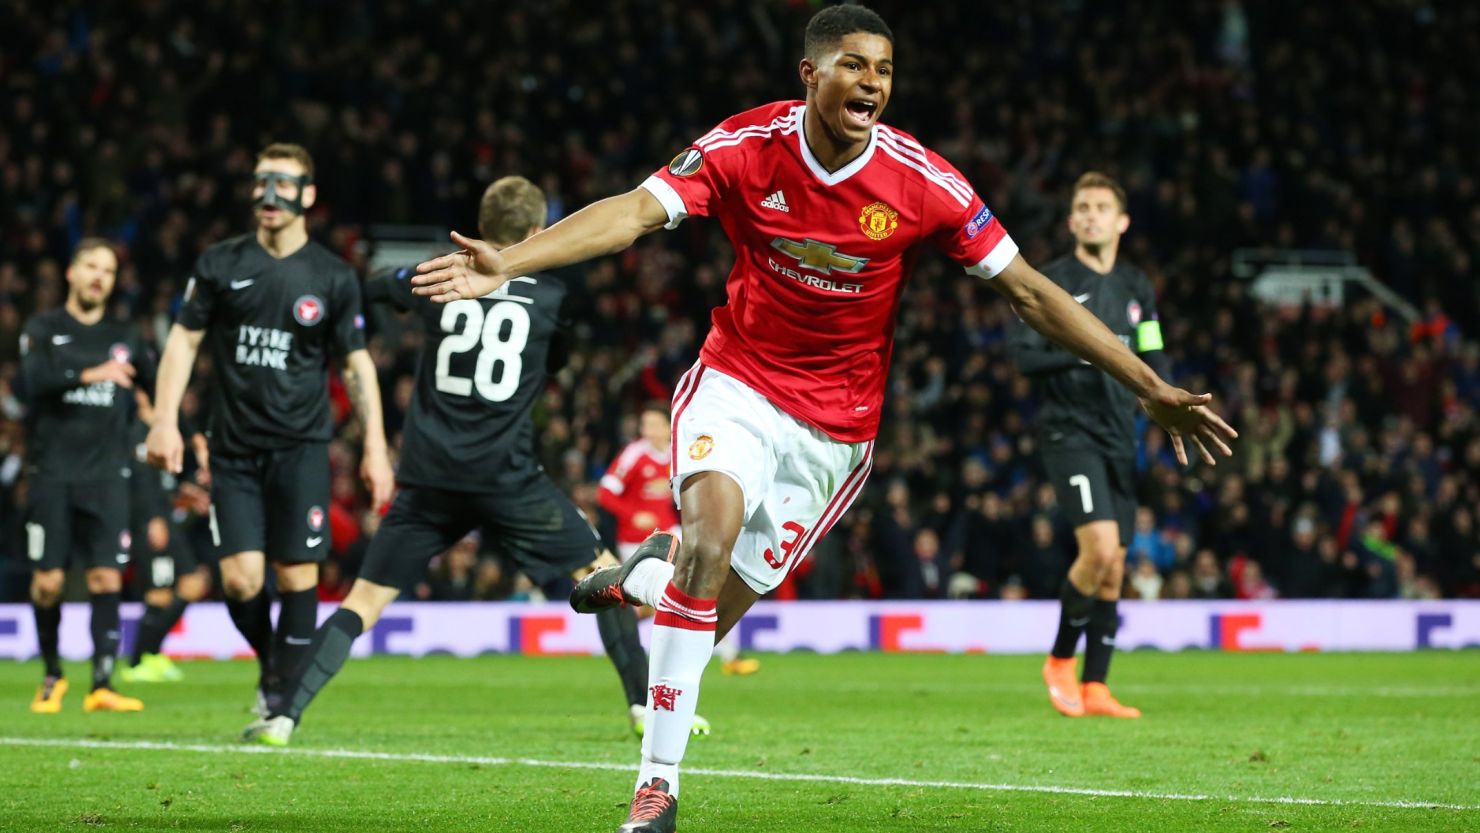 Marcus Rashford enjoyed a dream debut for Manchester United, scoring twice in the Europa League.